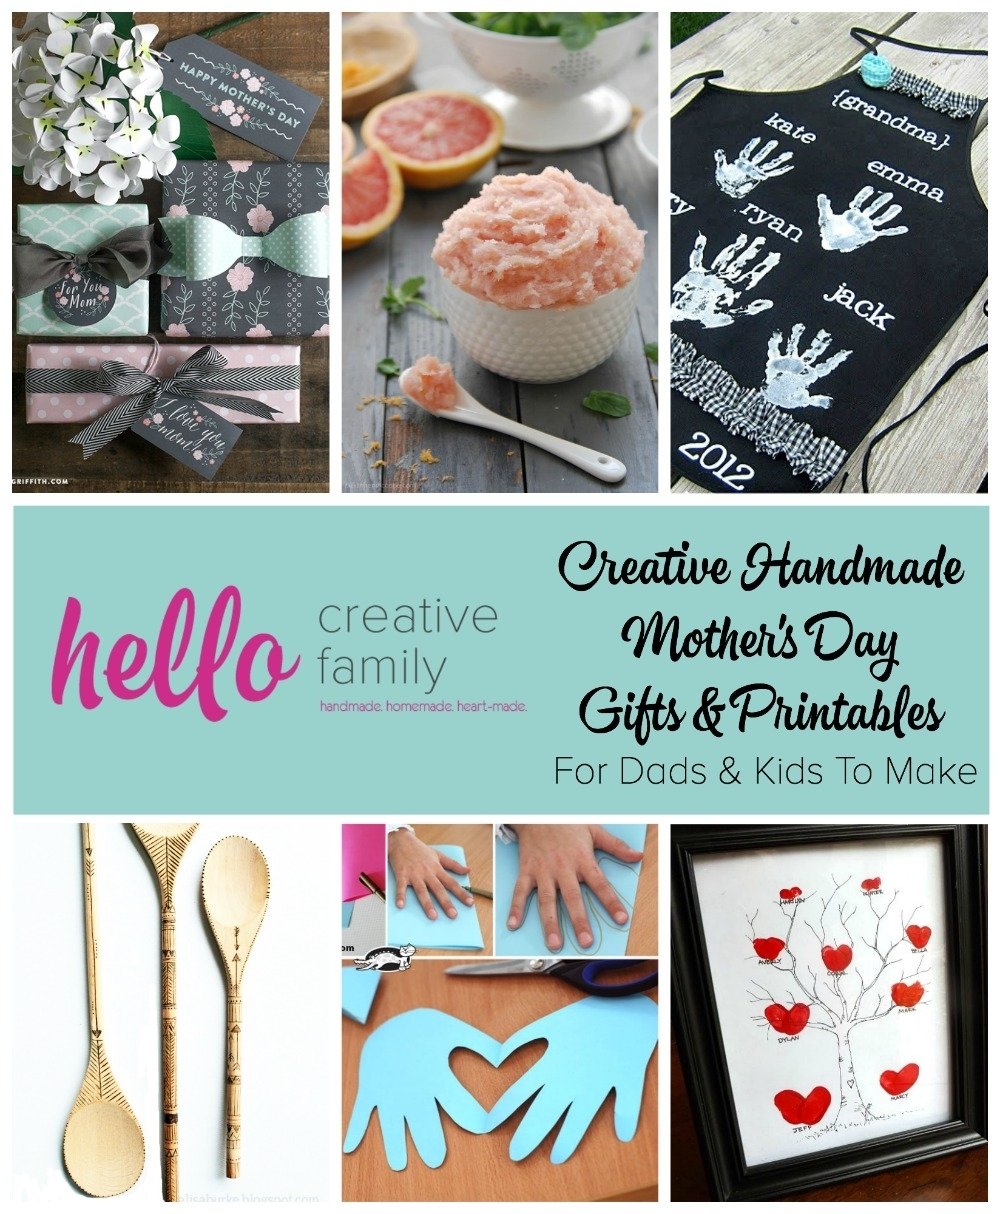 10 Beautiful Creative Gift Ideas For Mom creative handmade mothers day gifts and printables for dads and kids 1 2023